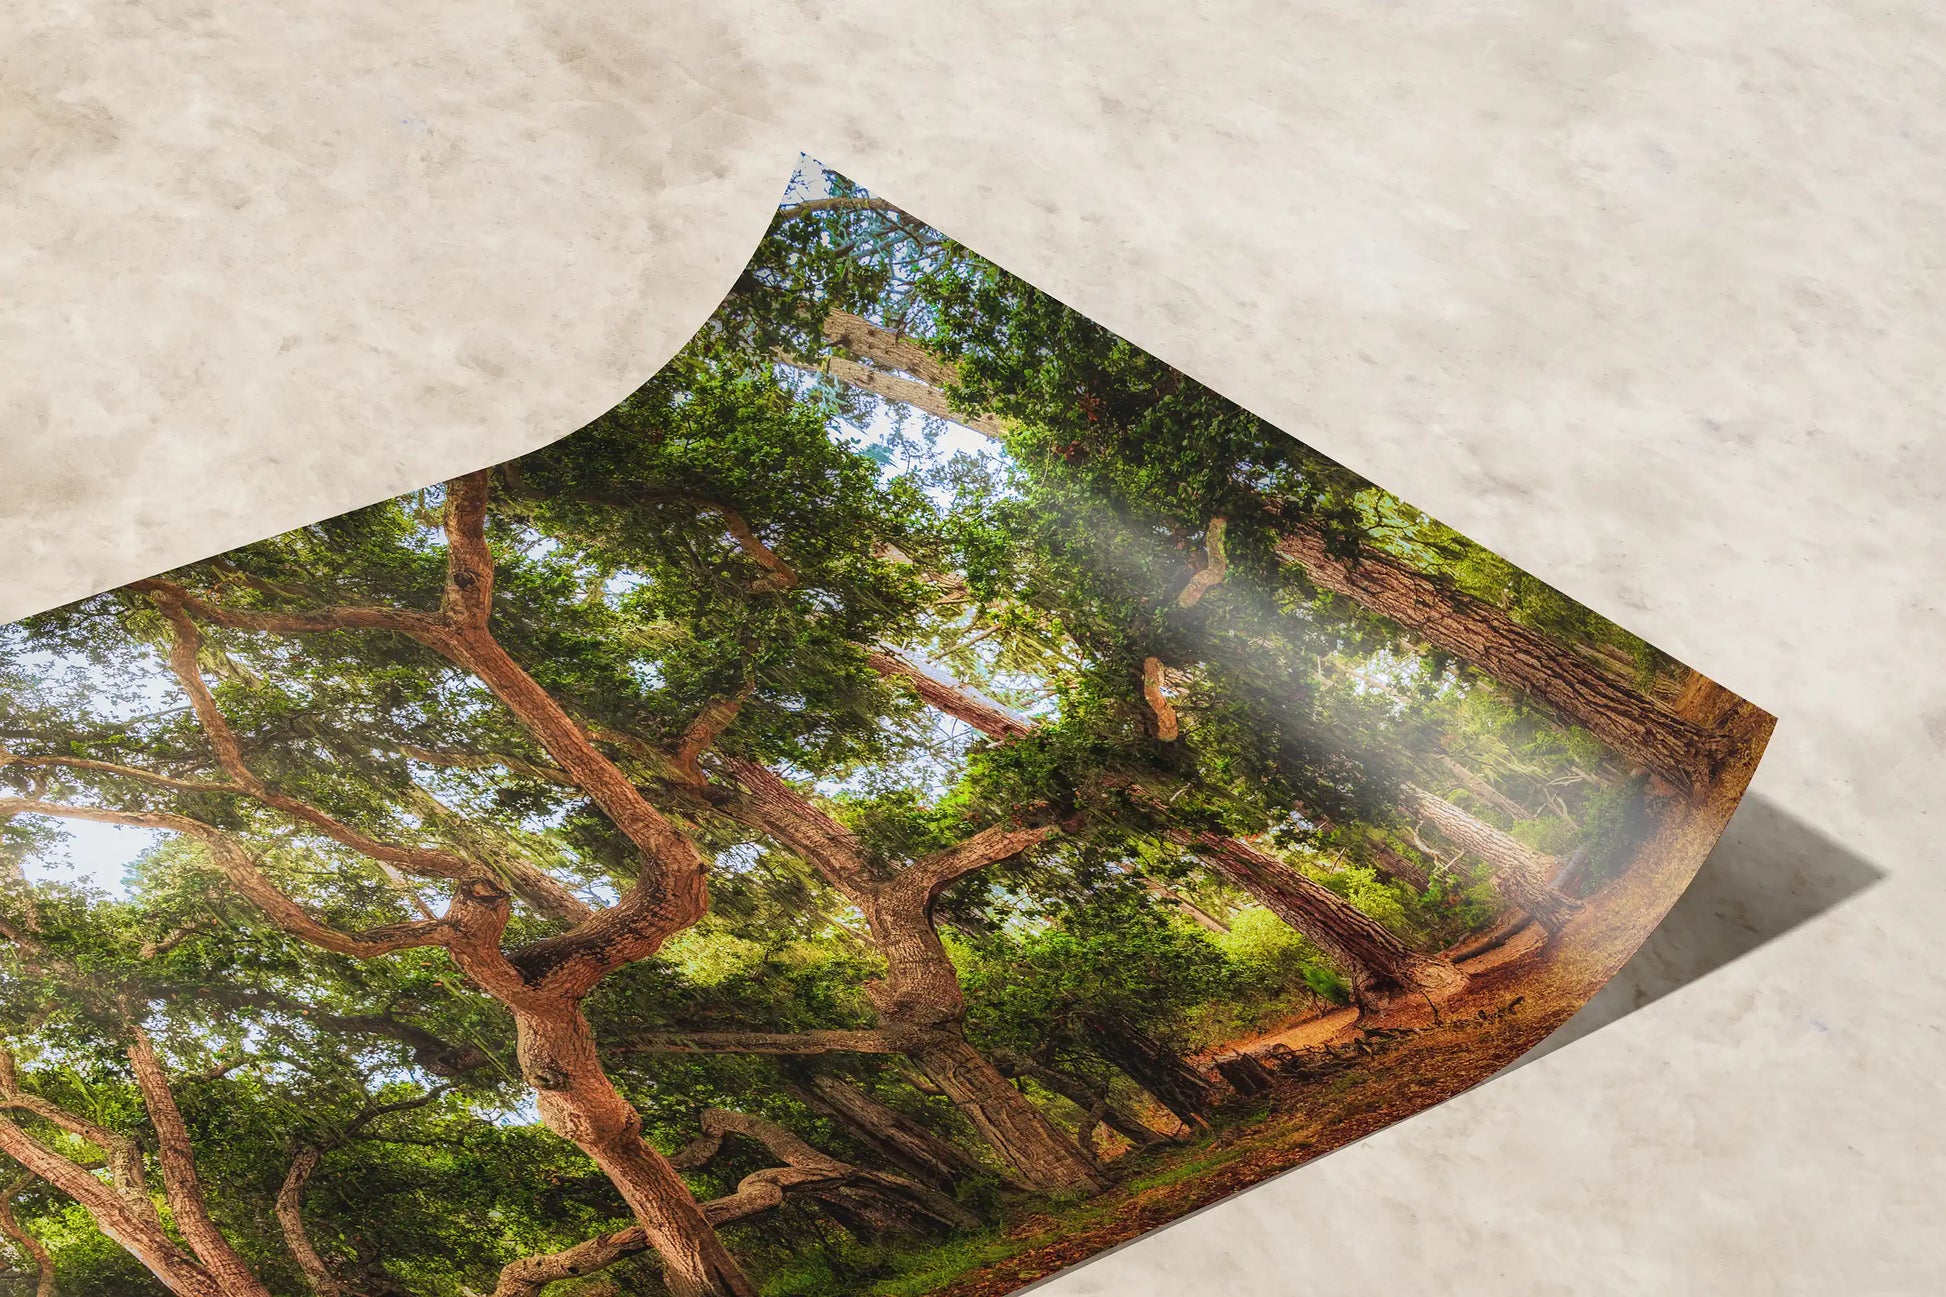 A premium paper print of Coast Live Oak Tree art, showing the vibrant, sunlit canopy and textured bark, leaning against a white wall.